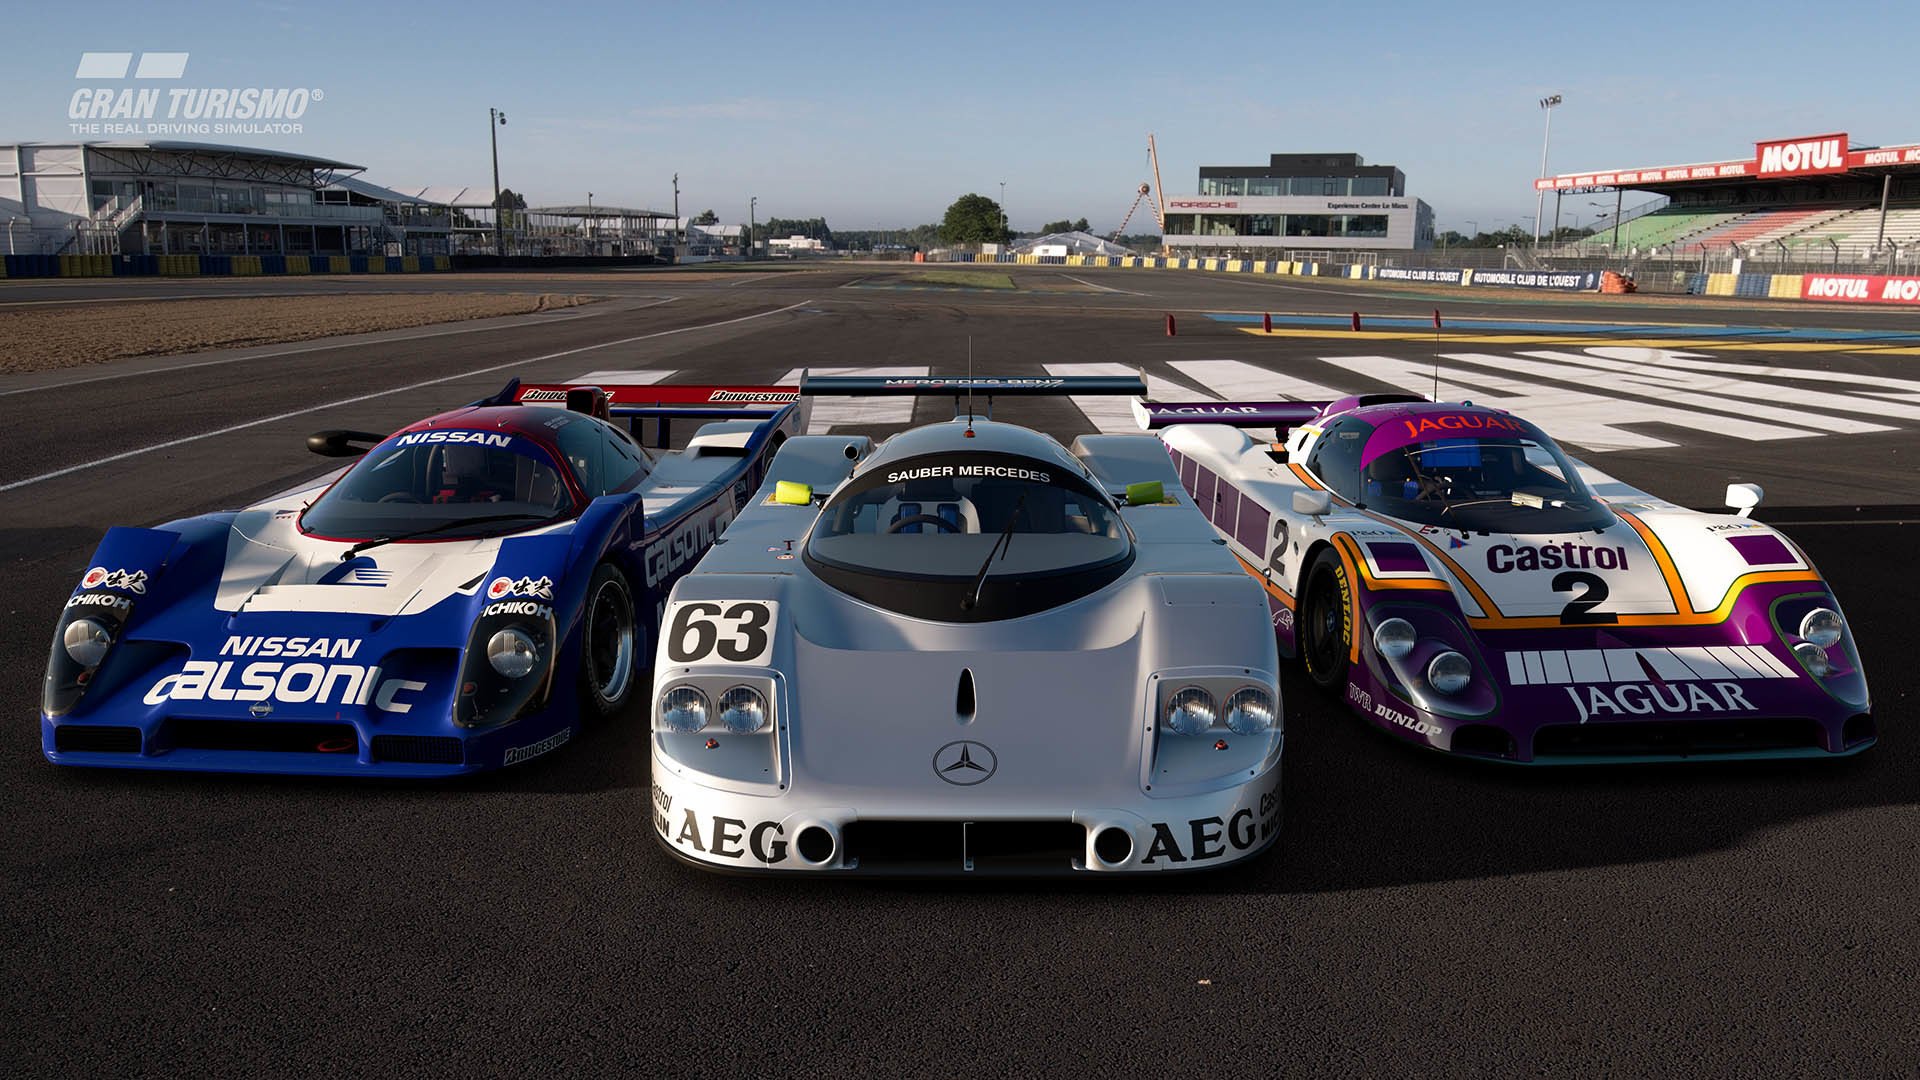 Gran Turismo 7 Might Have Been Leaked by World's Leading Racing Simulator Brand; Possibly Launching This Year